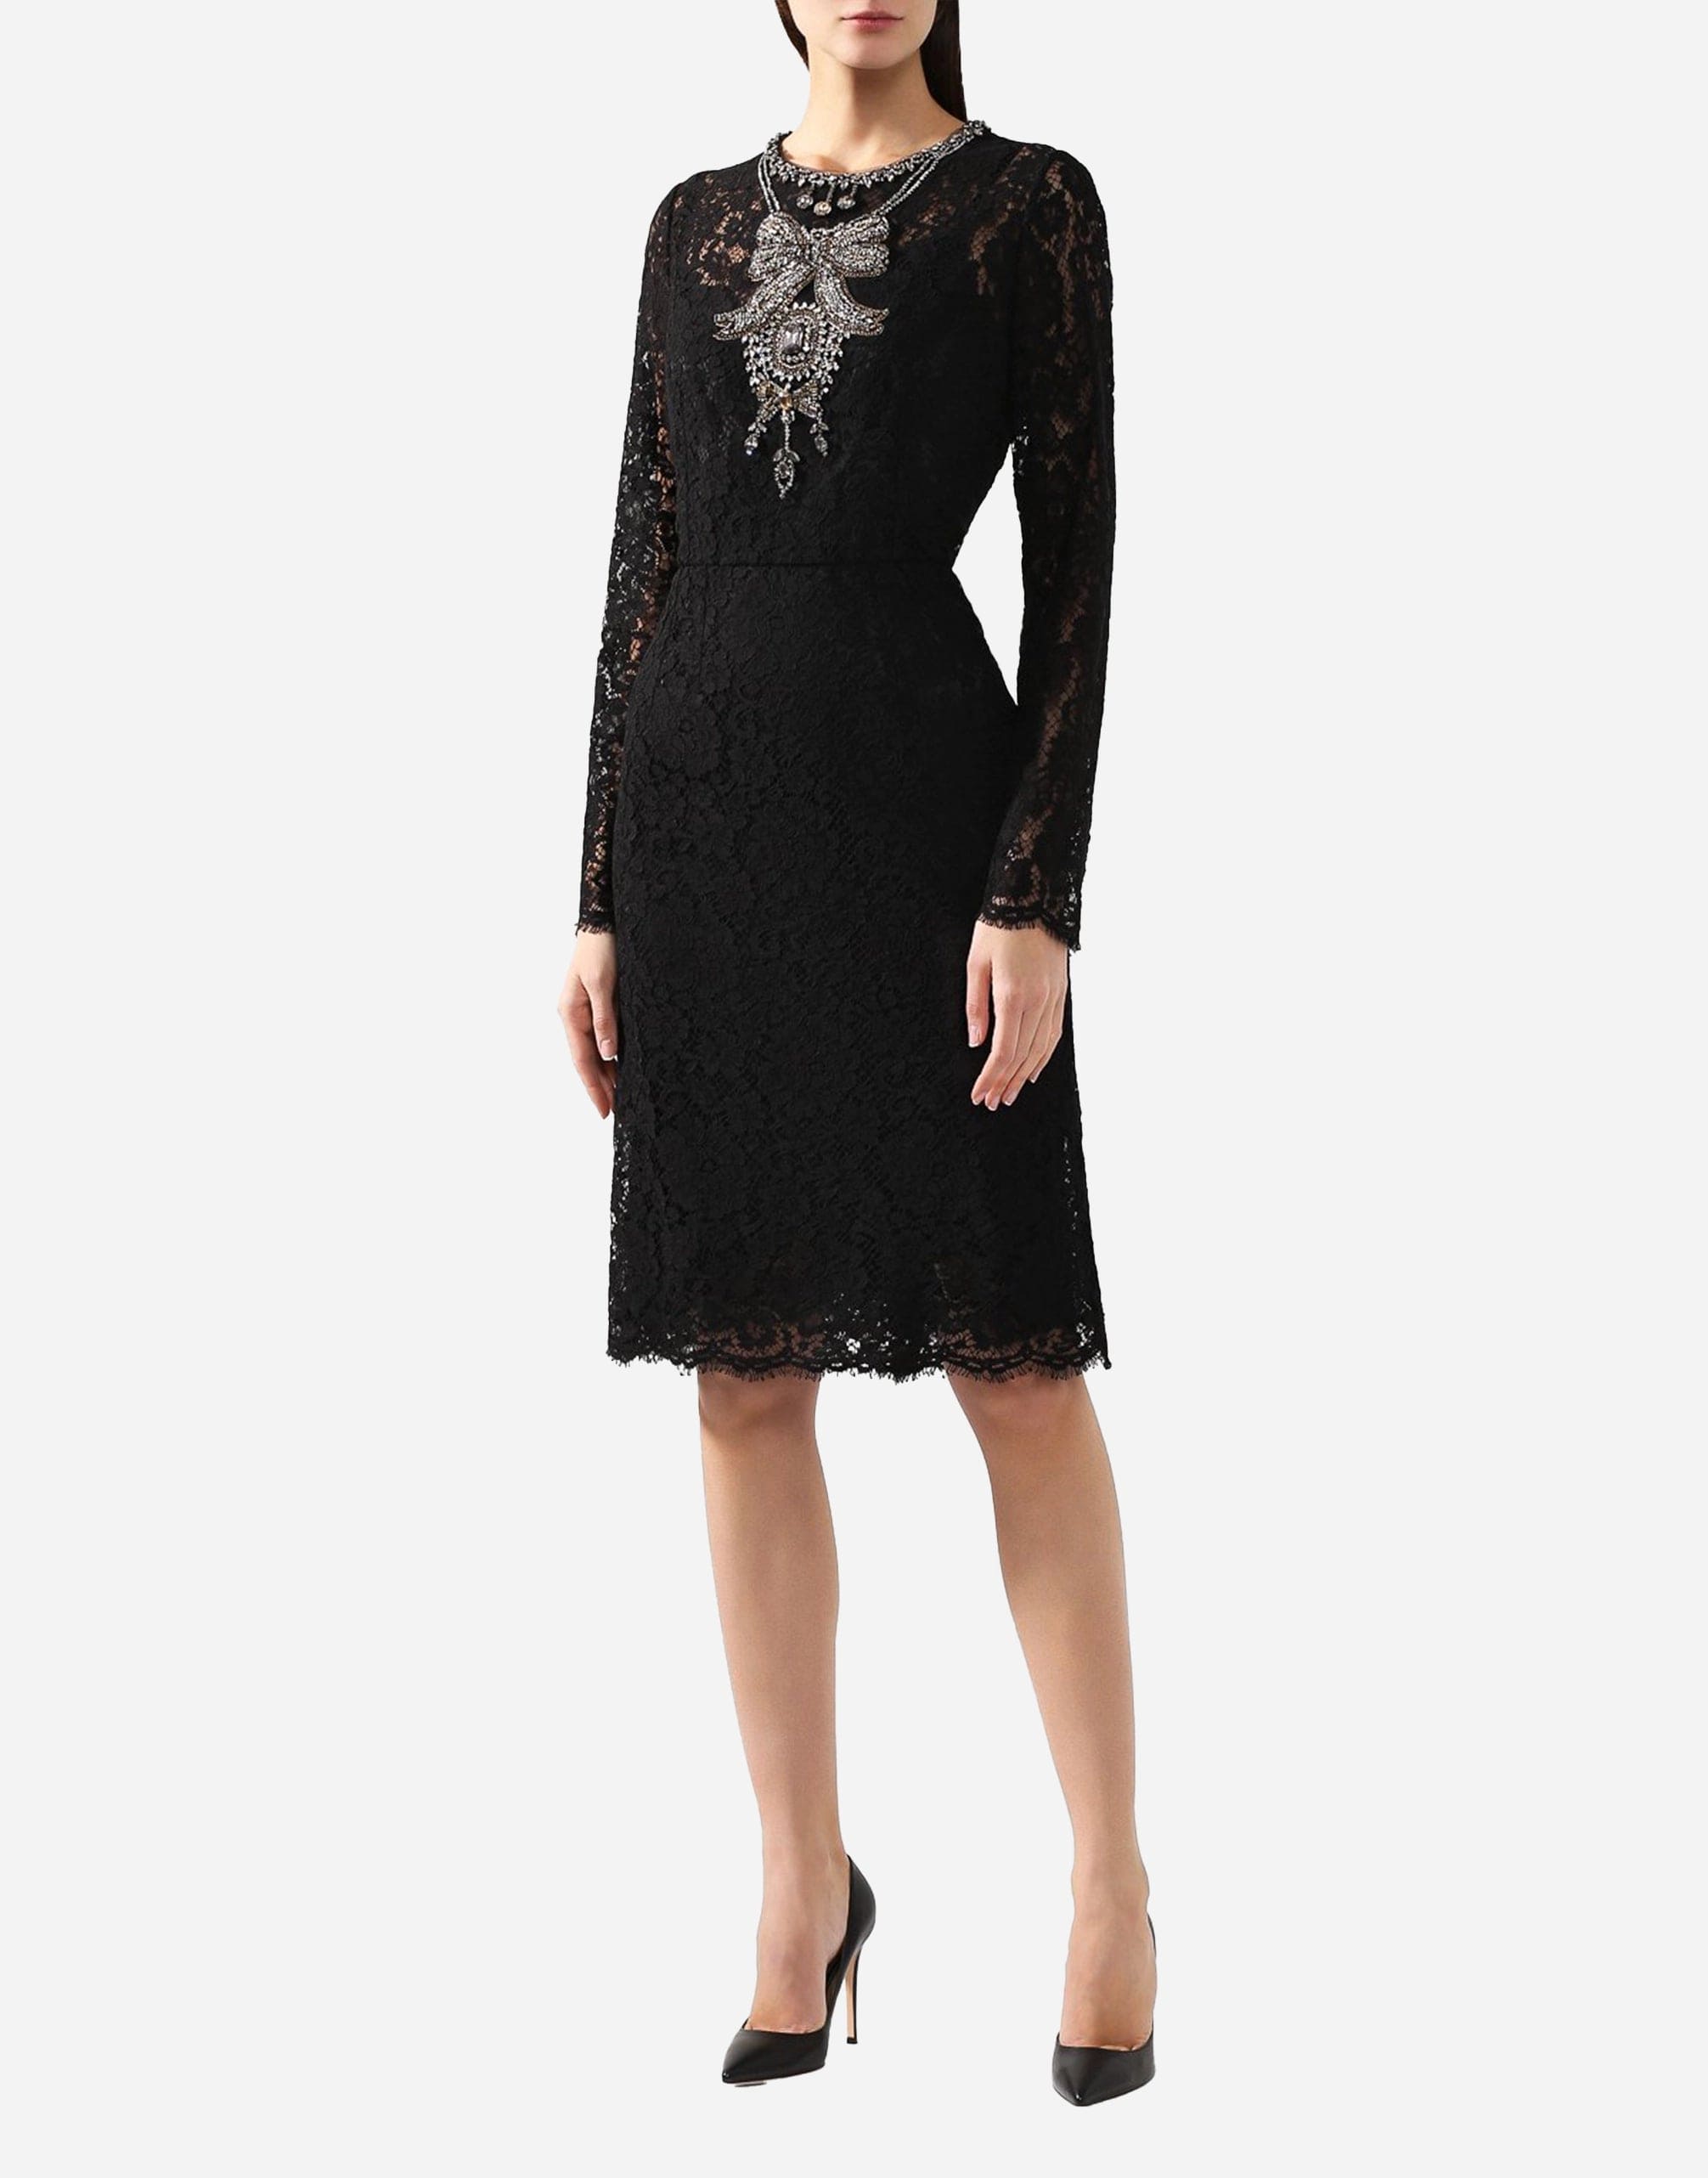 Lace Dress With Crystal Embellishments